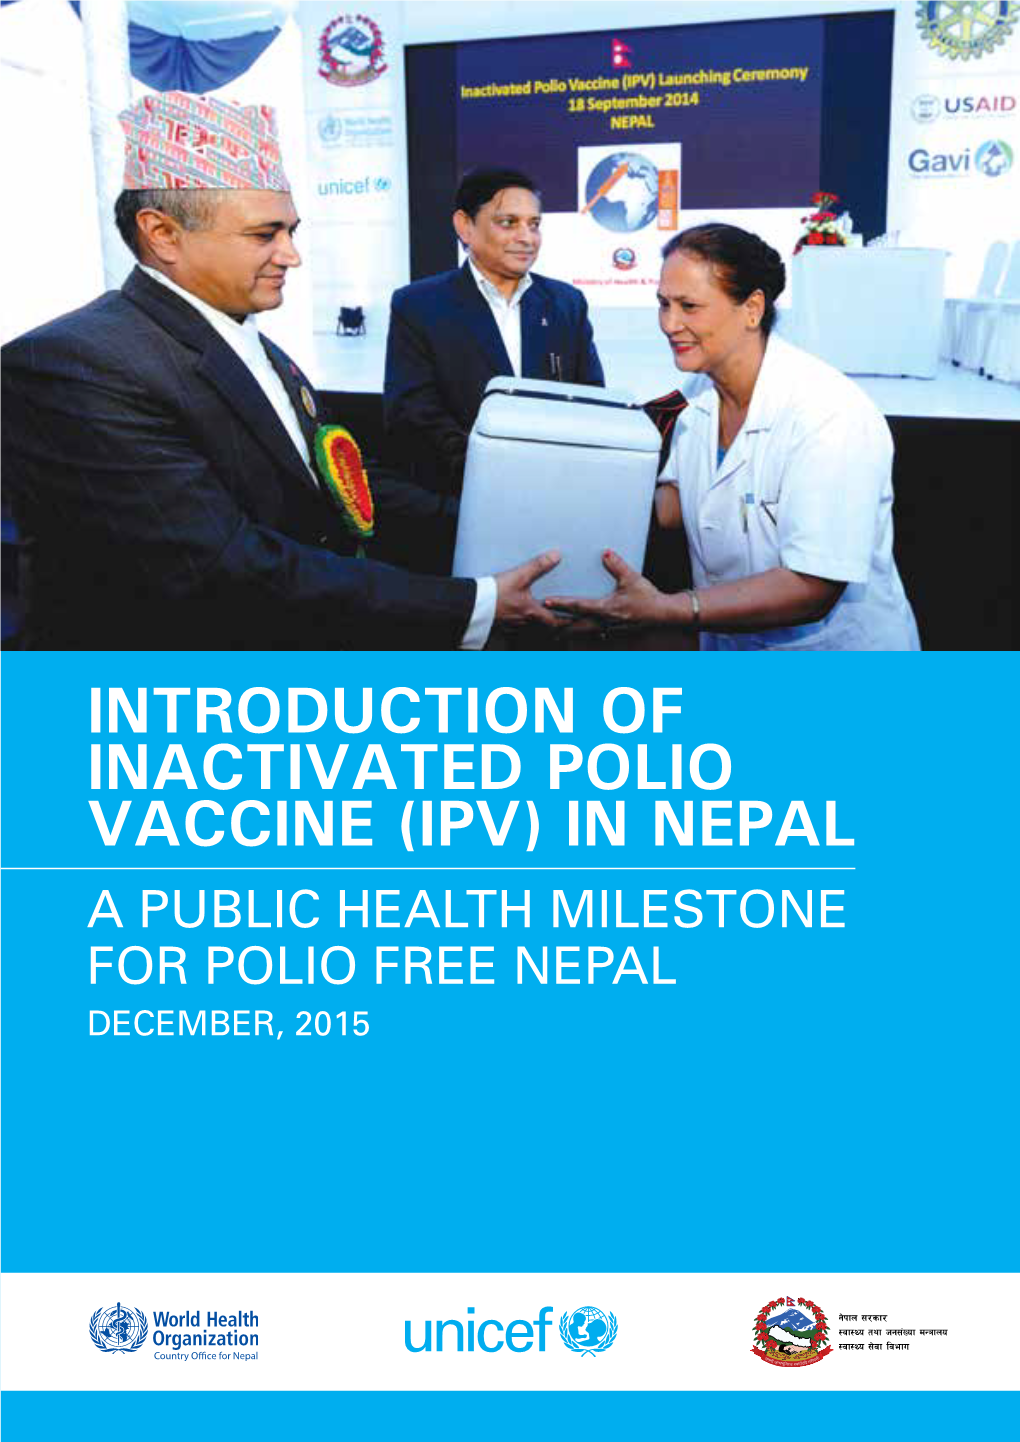 Introduction of Inactivated Polio Vaccine (Ipv) in Nepal